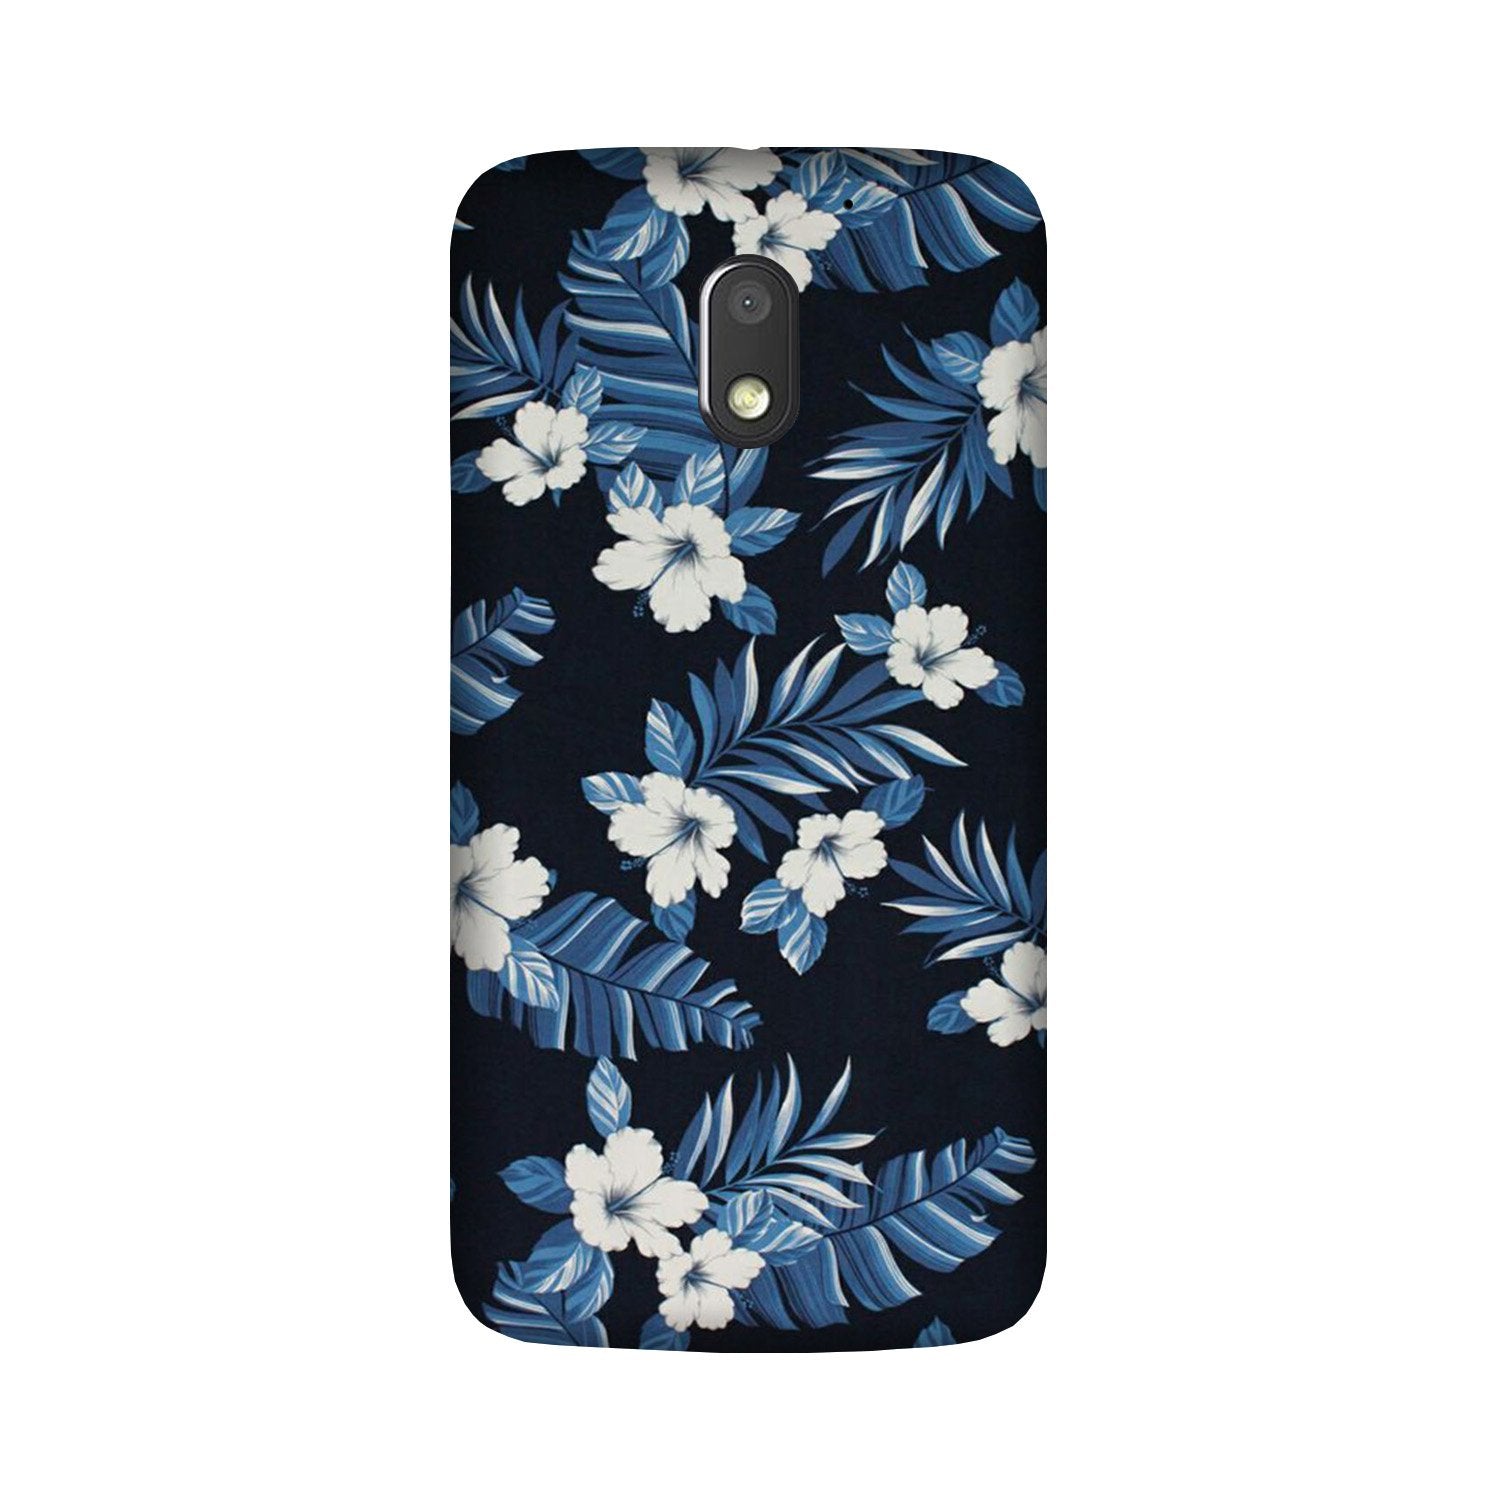 White flowers Blue Background2 Case for Moto G4 Play